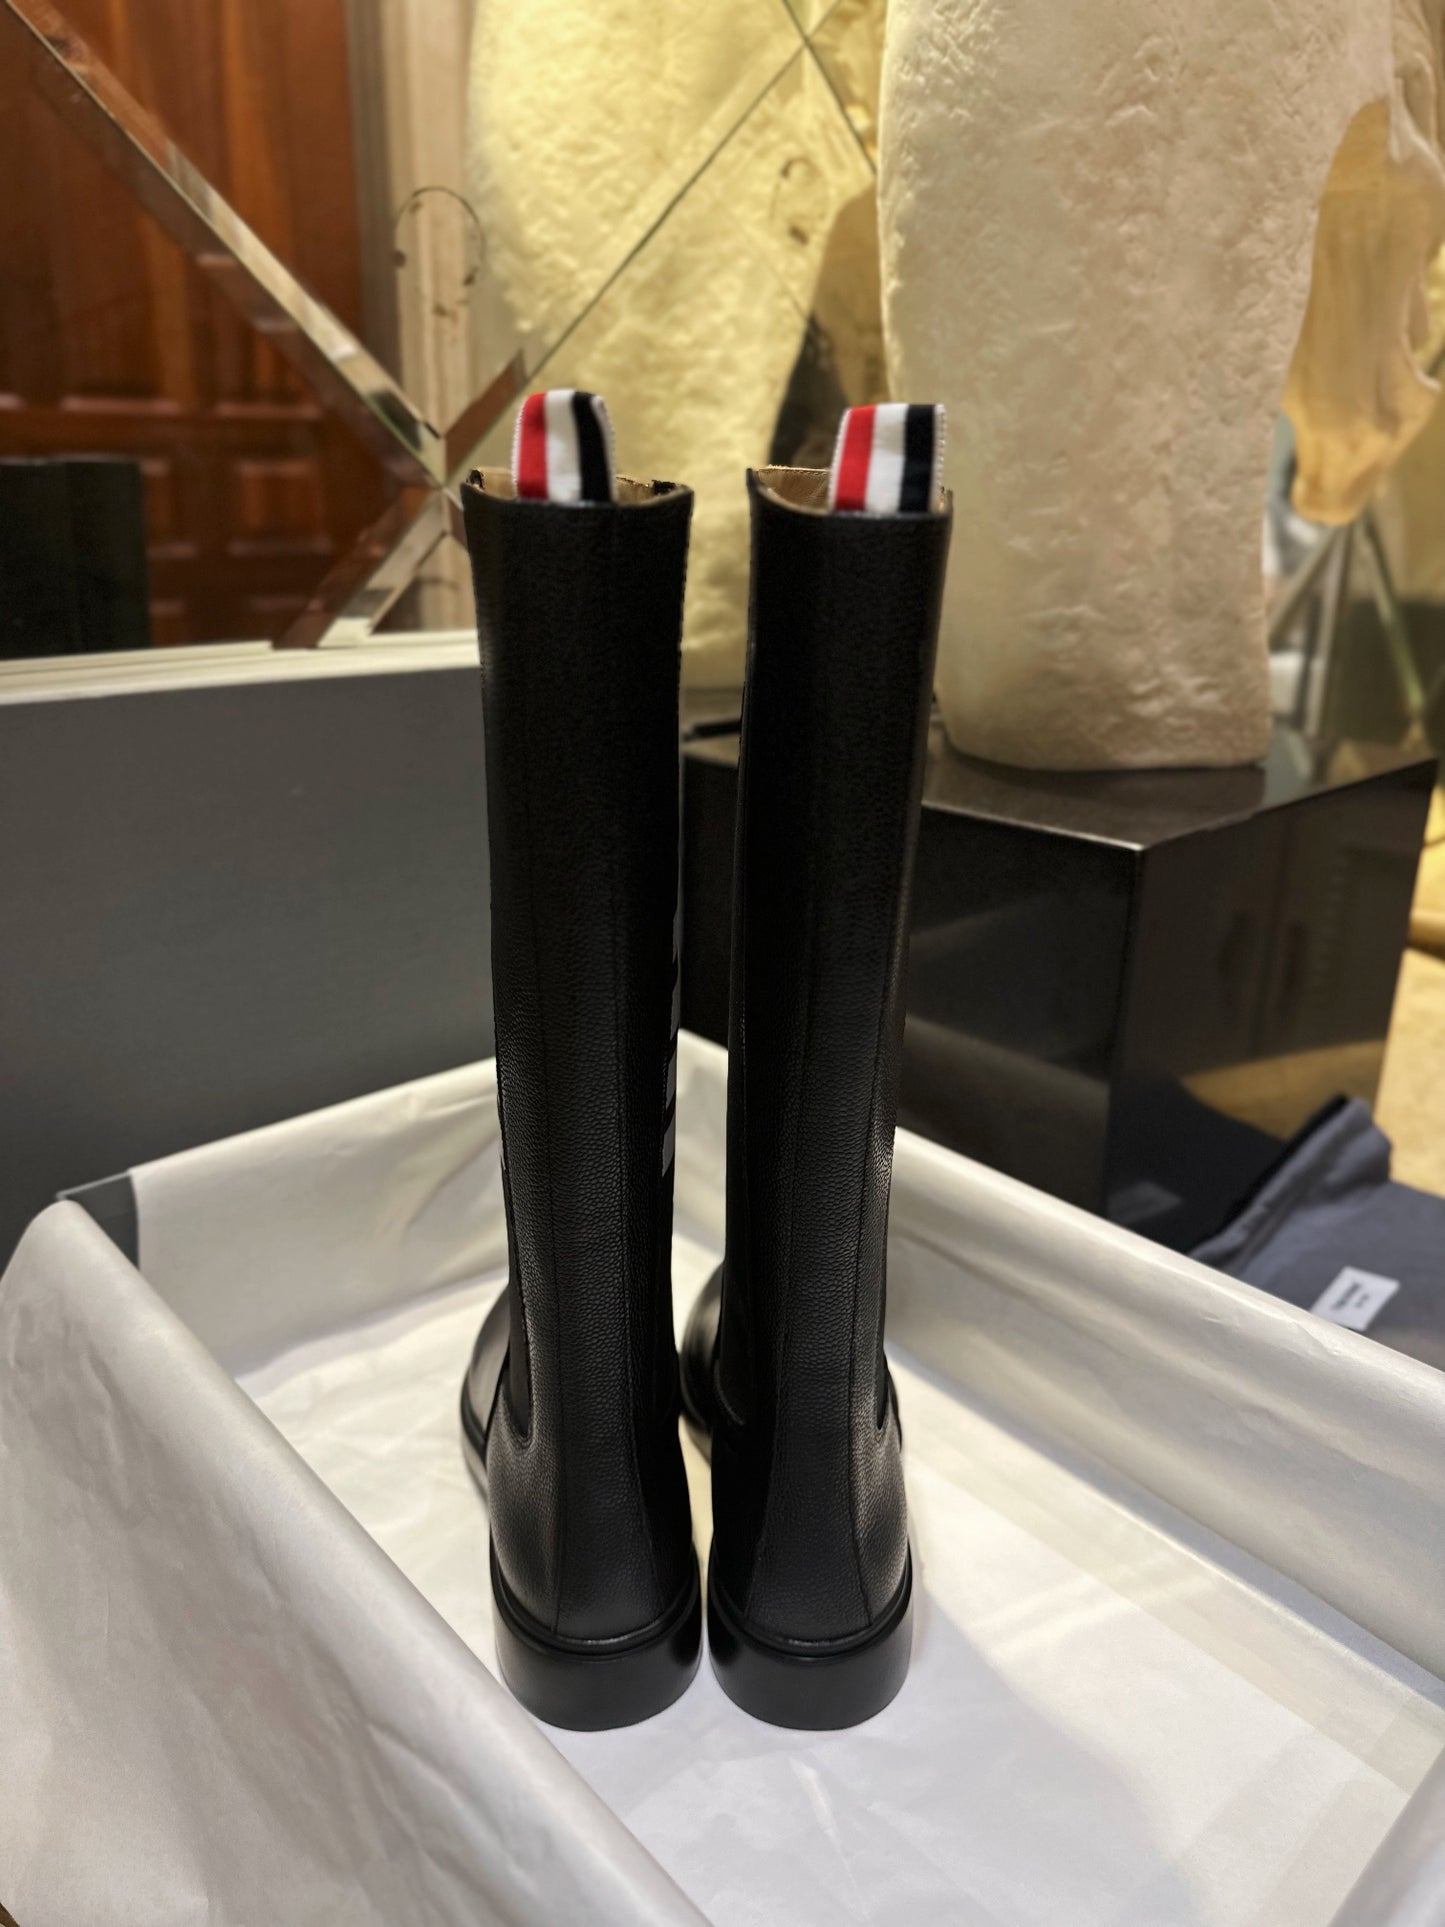 𝗧𝗛𝗢𝗠 𝗕𝗥𝗢𝗪𝗡𝗘 BOOTS